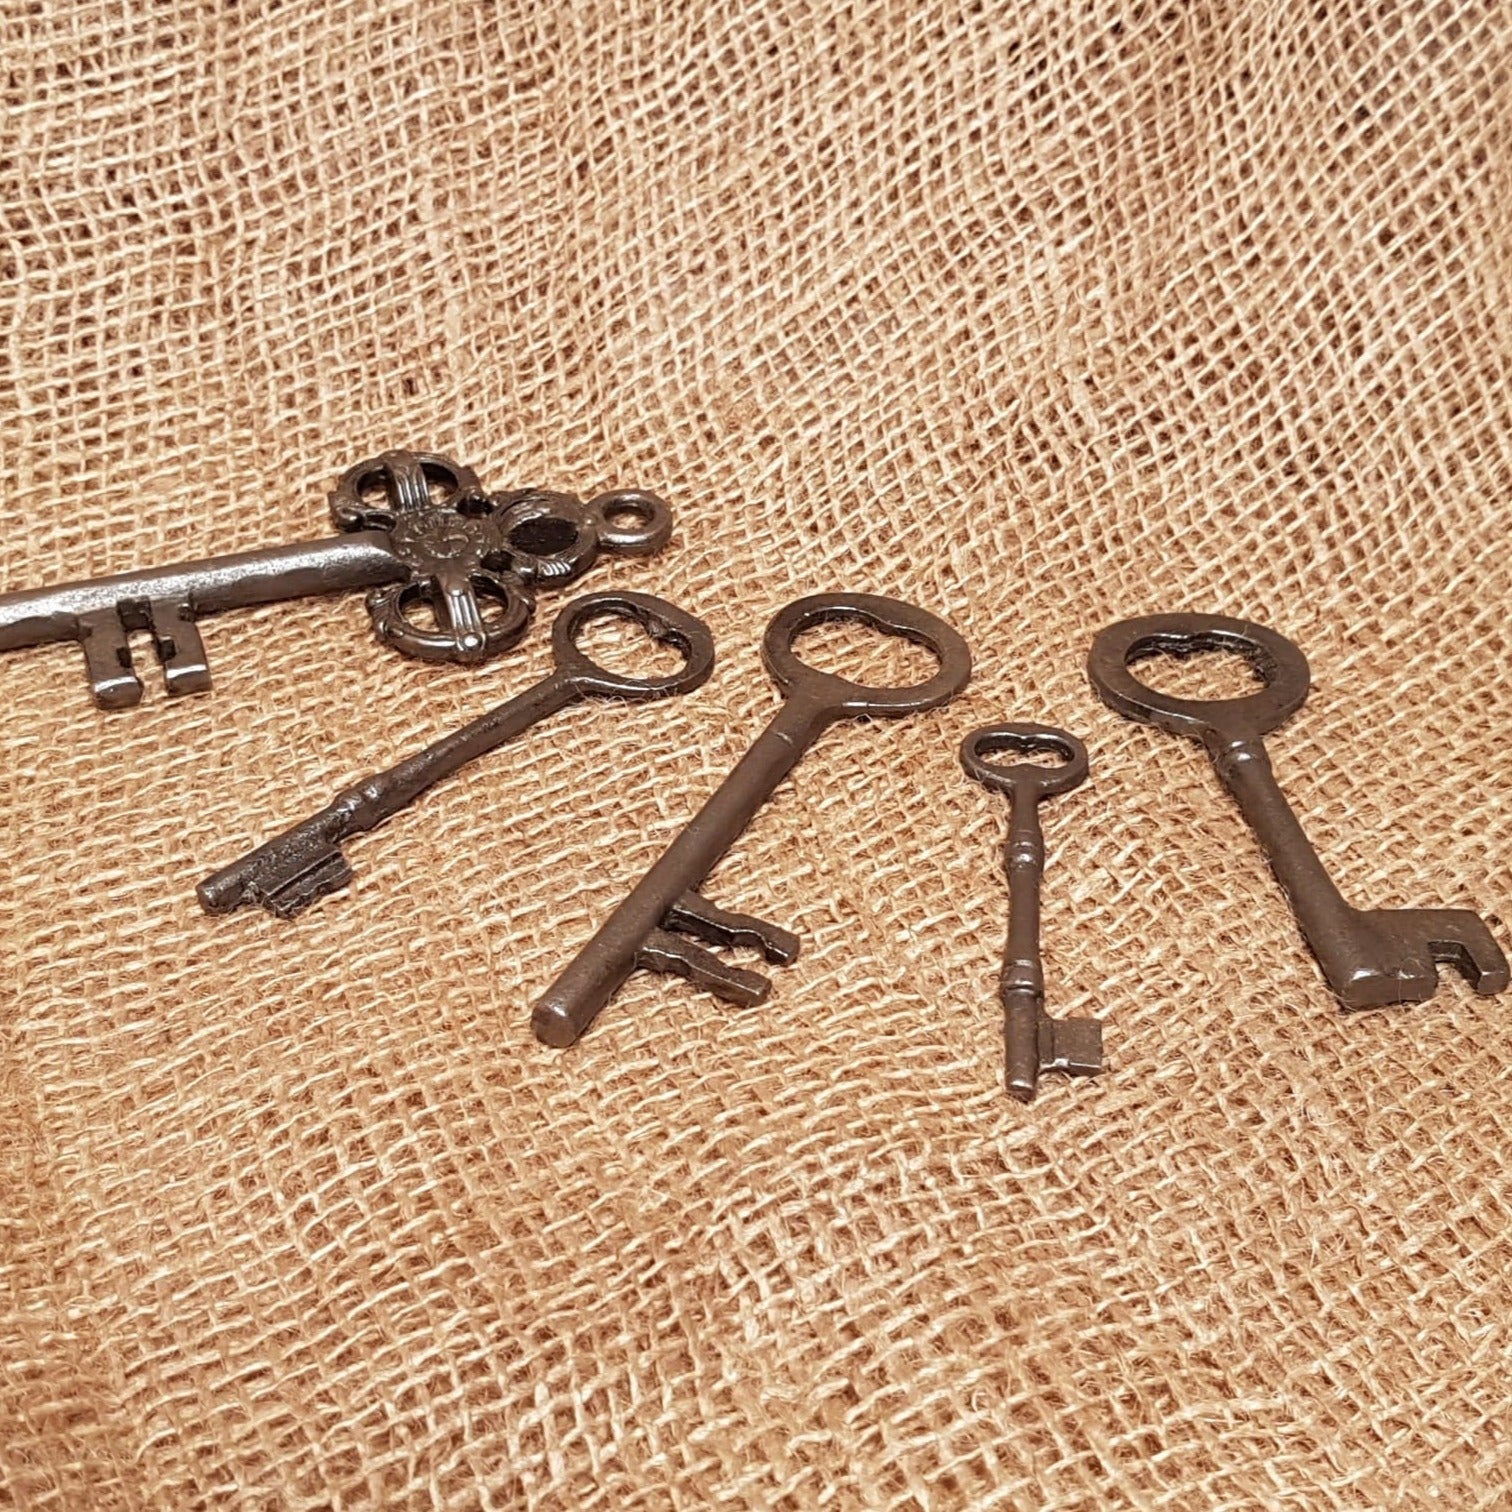 Keys - Decorative Cast Iron (set of 5) - Spearhead Collection - Padlocks, Keys & Chains - D.I.Y. - Do It Yourself Projects, Home Decor, Interior Decor, Keys & Chains